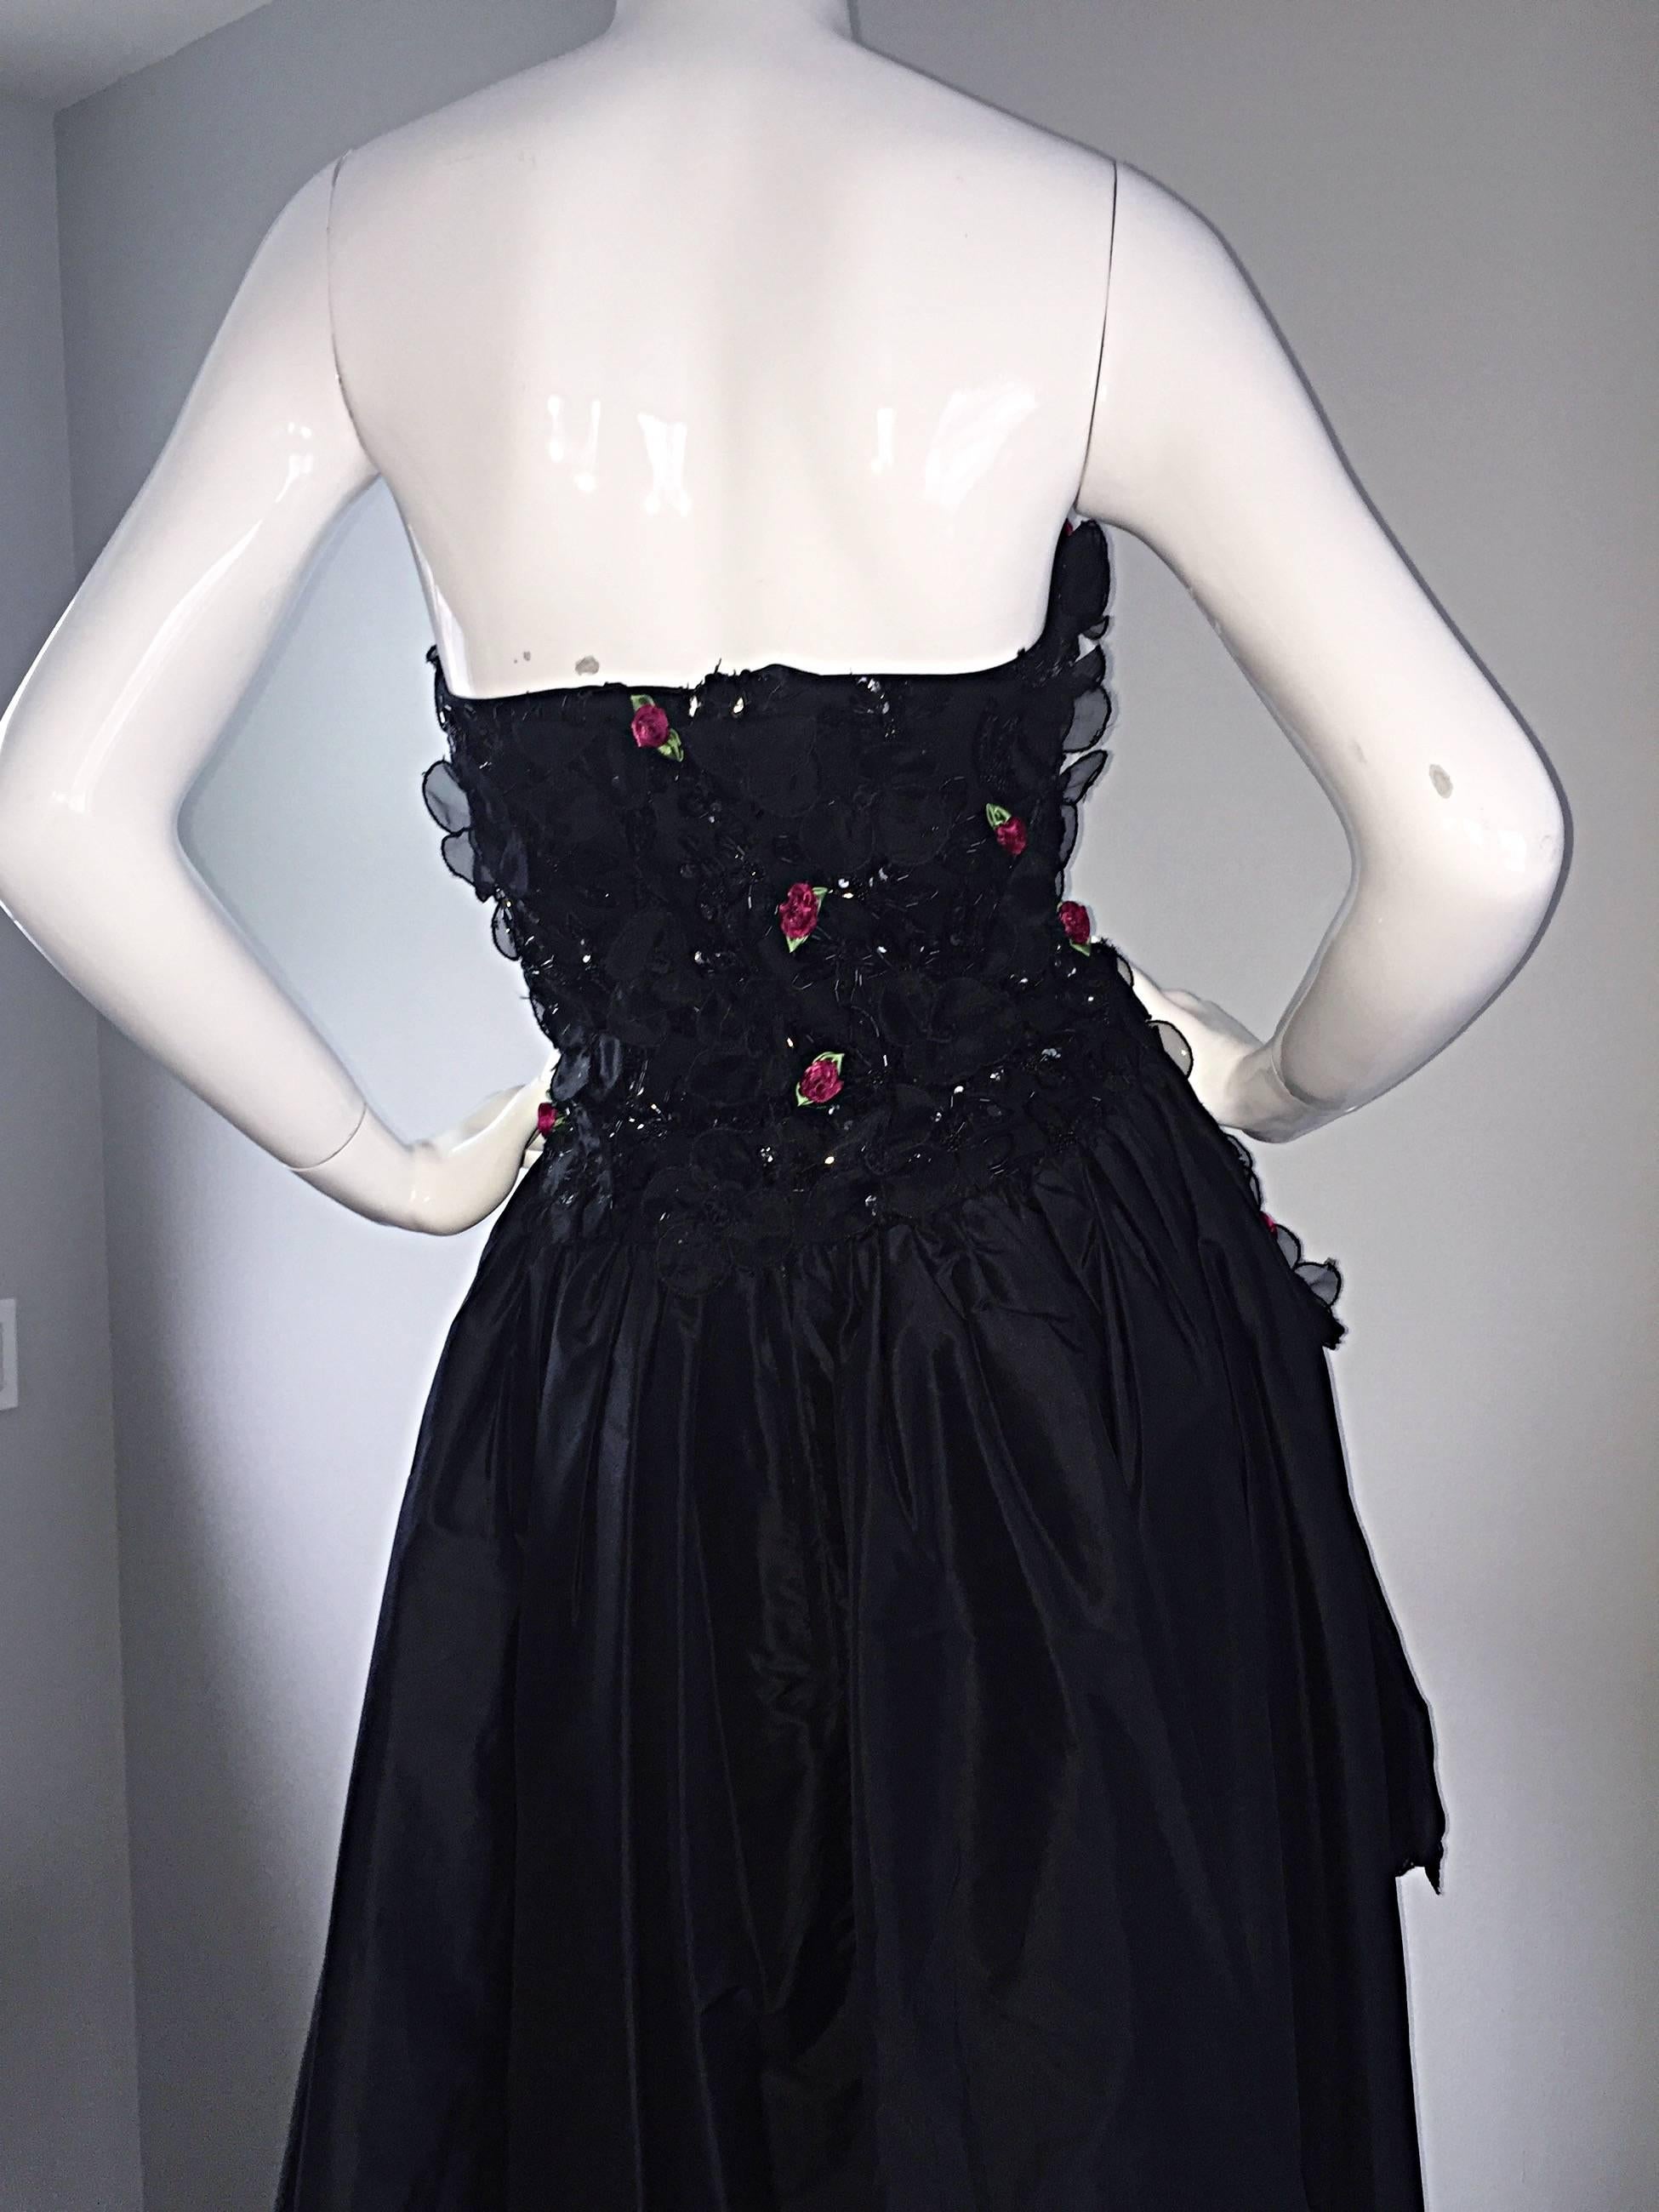 Exceptional 1950s Vintage Black Silk Taffeta Hi - Lo Dress w/ Rosettes and Lace For Sale 2